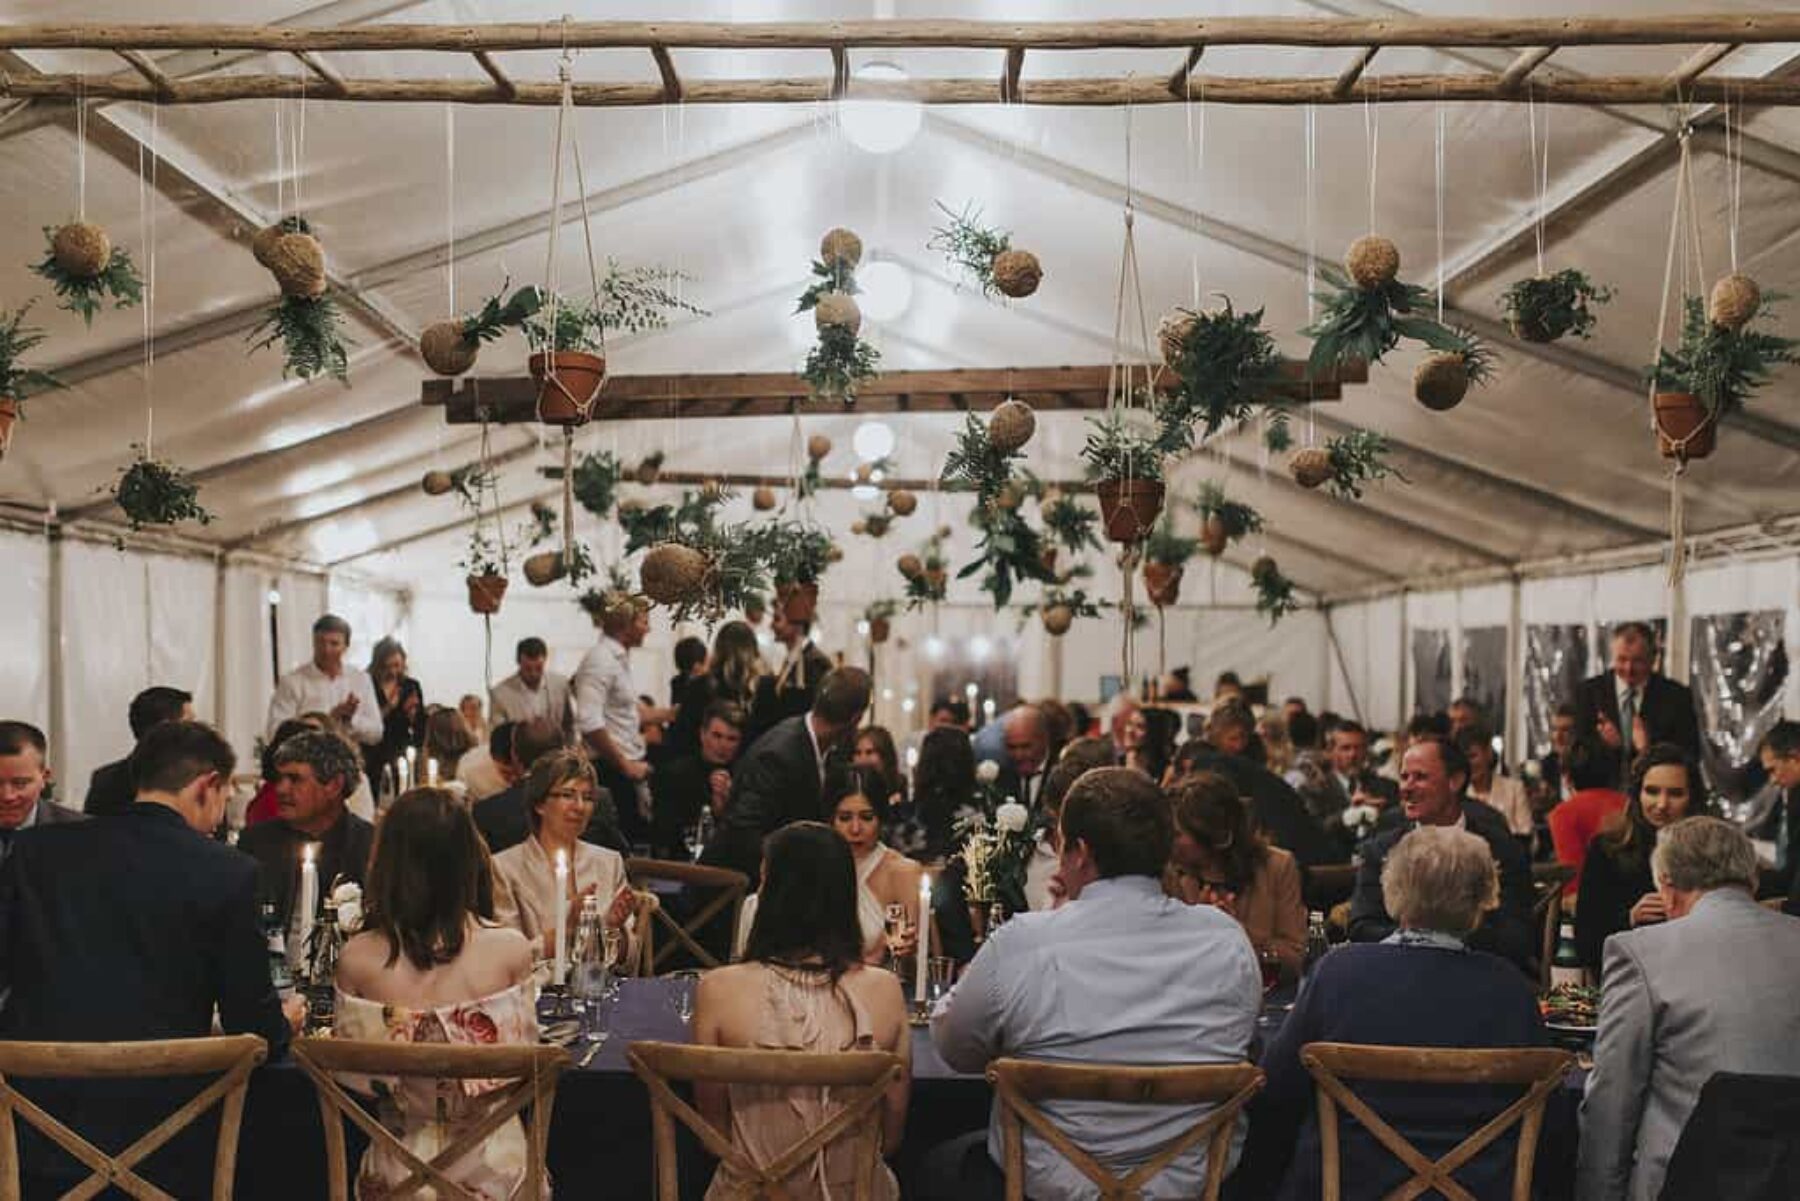 marquee wedding with hanging plants and kokedamas